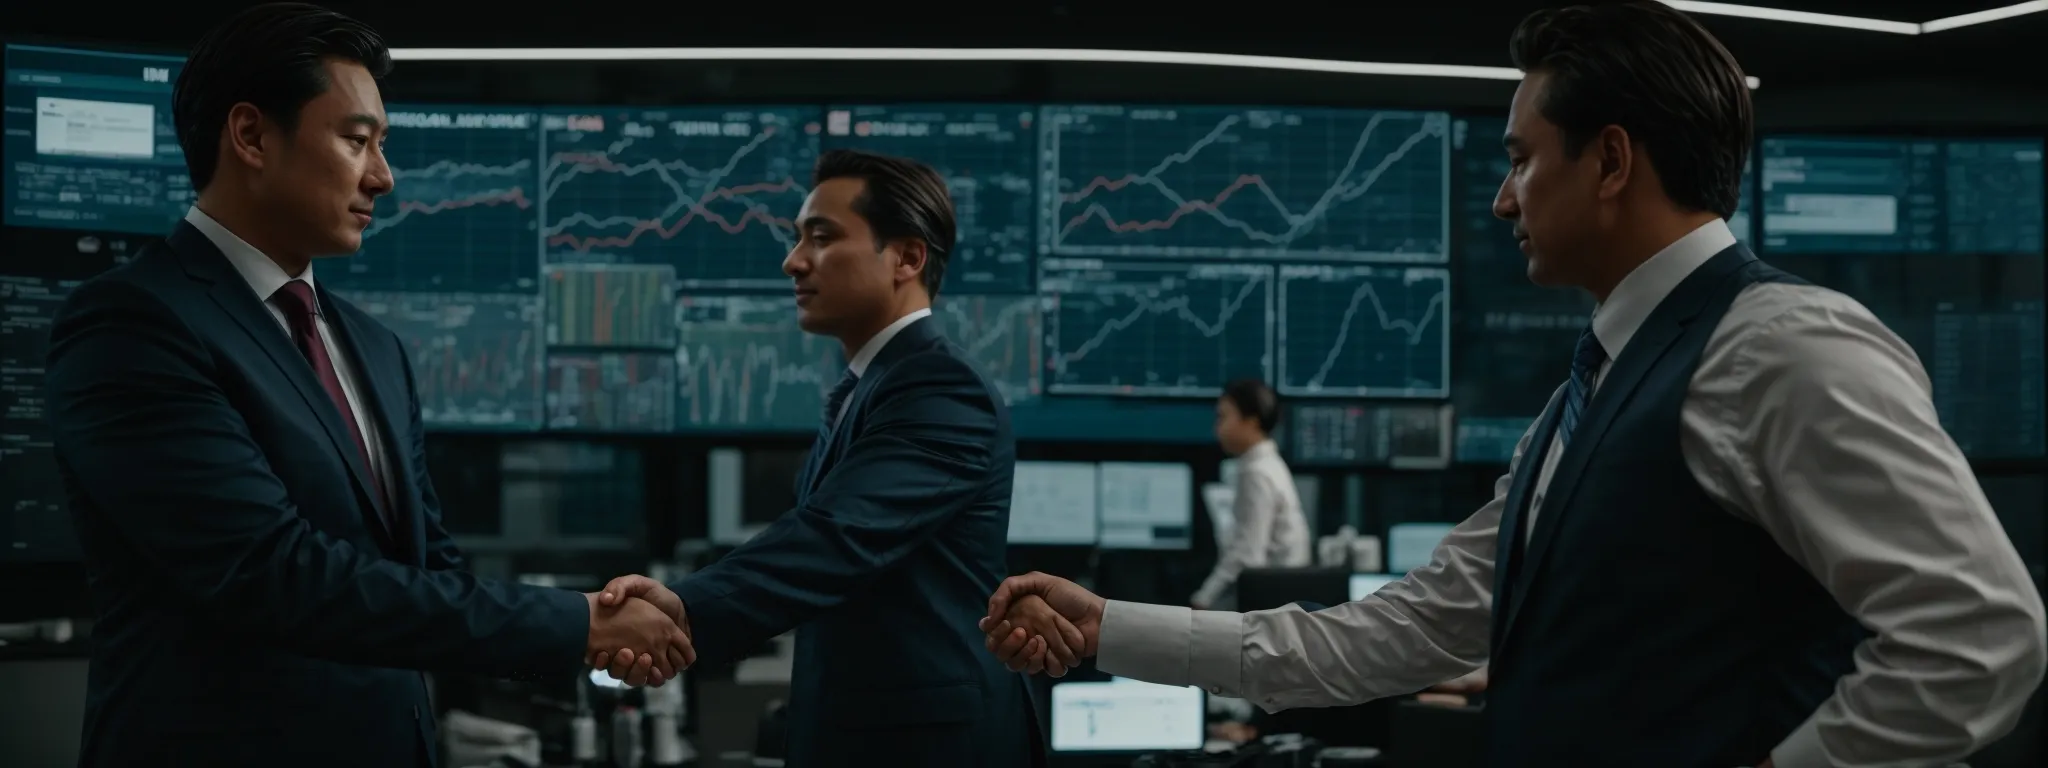 two business professionals shaking hands in front of a digital screen displaying a web interface.